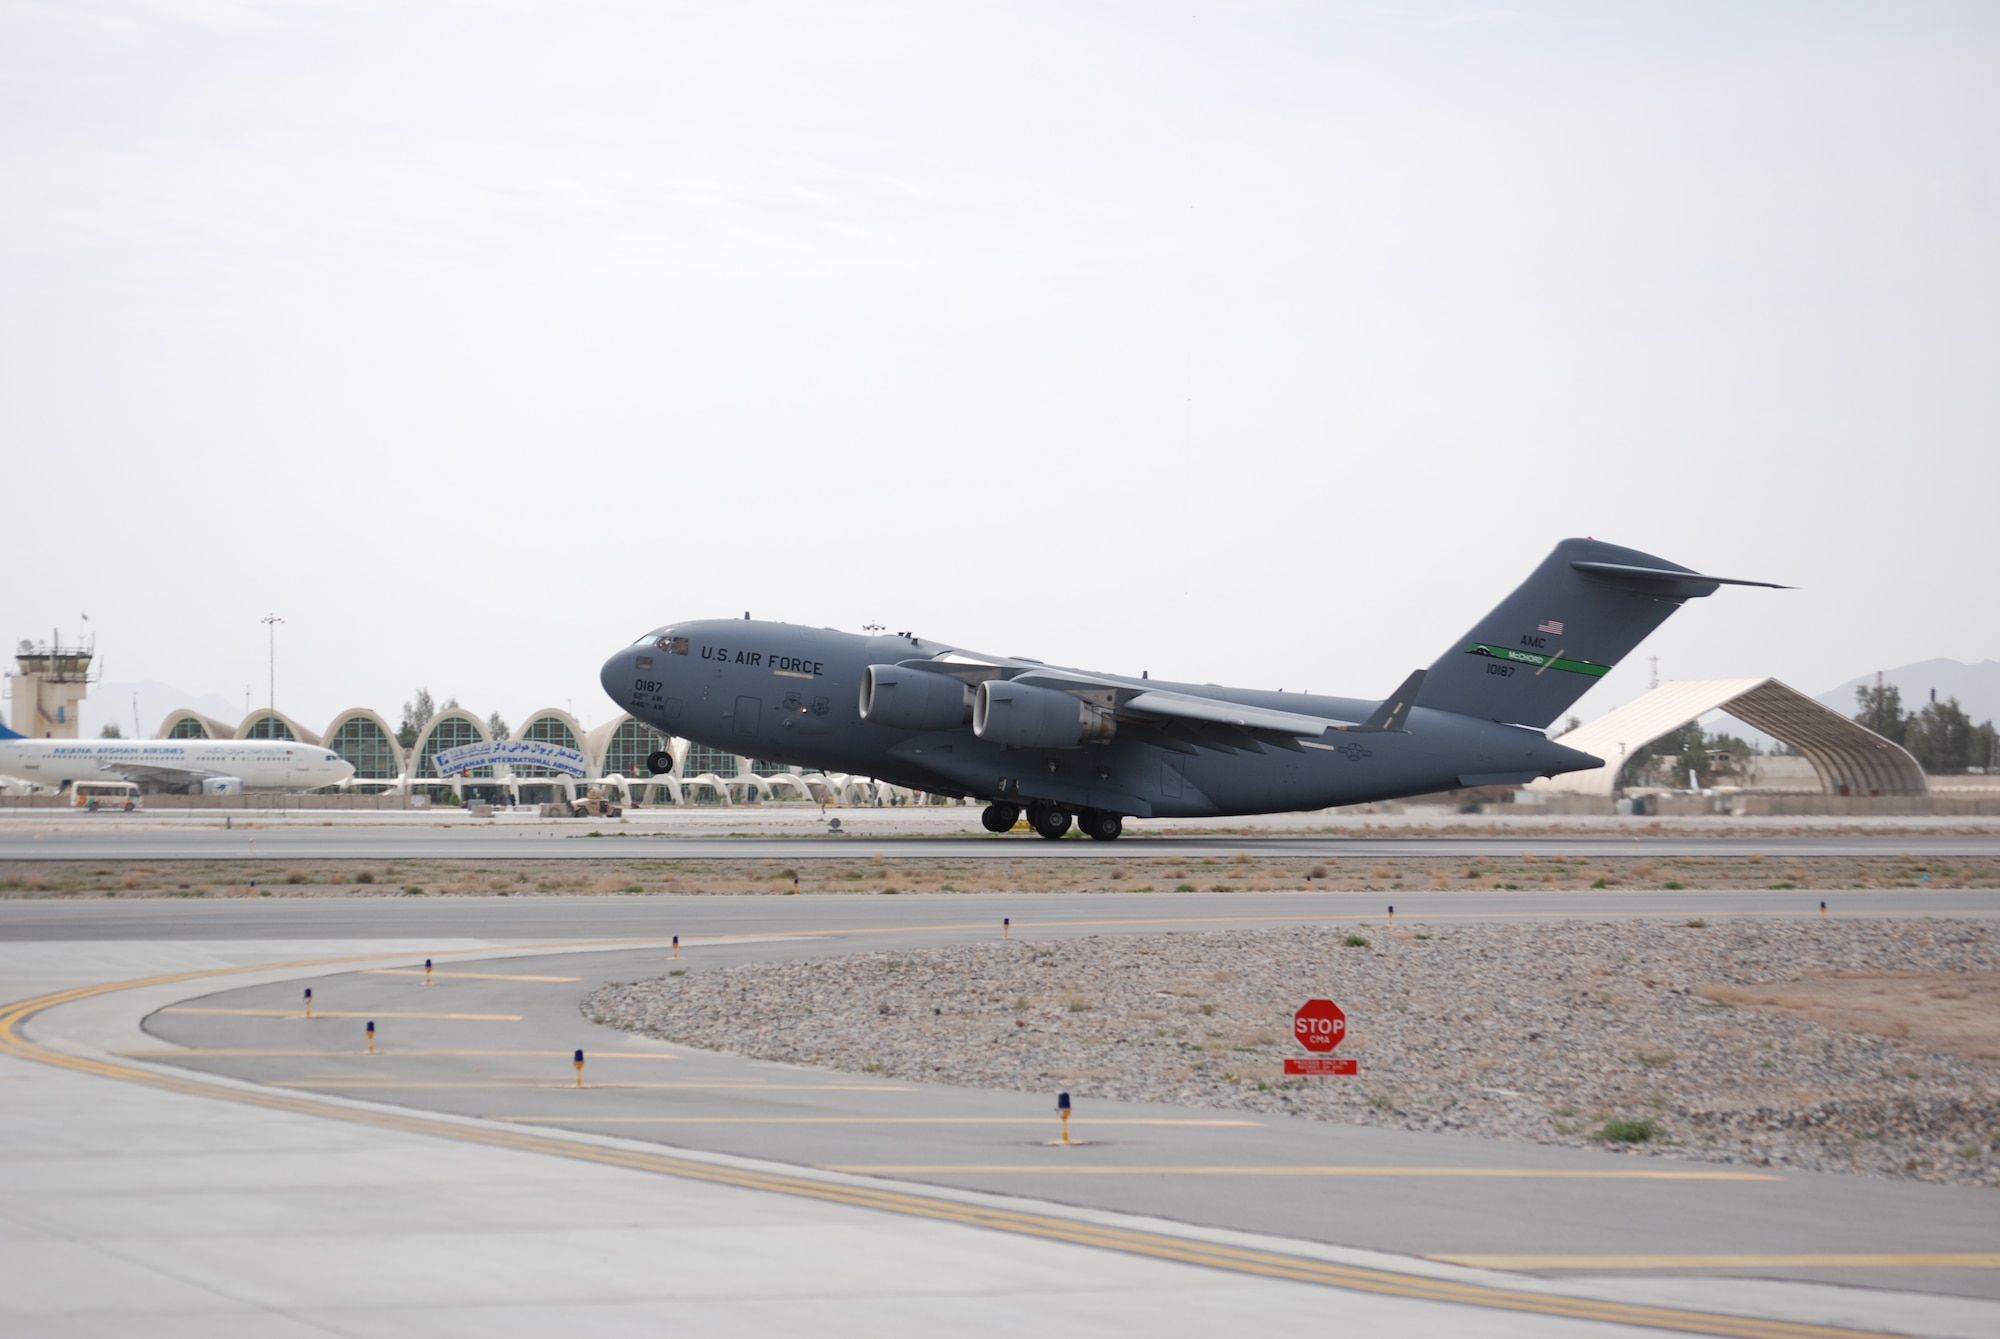 A C-17 Globemaster III departs from Kandahar Airfield, March 20, 2014. C-17s are frequently used to transport large vehicles, cargo and passengers in and out of Afghanistan. (U.S. Air Force photo by Capt. Brian Wagner/Released)